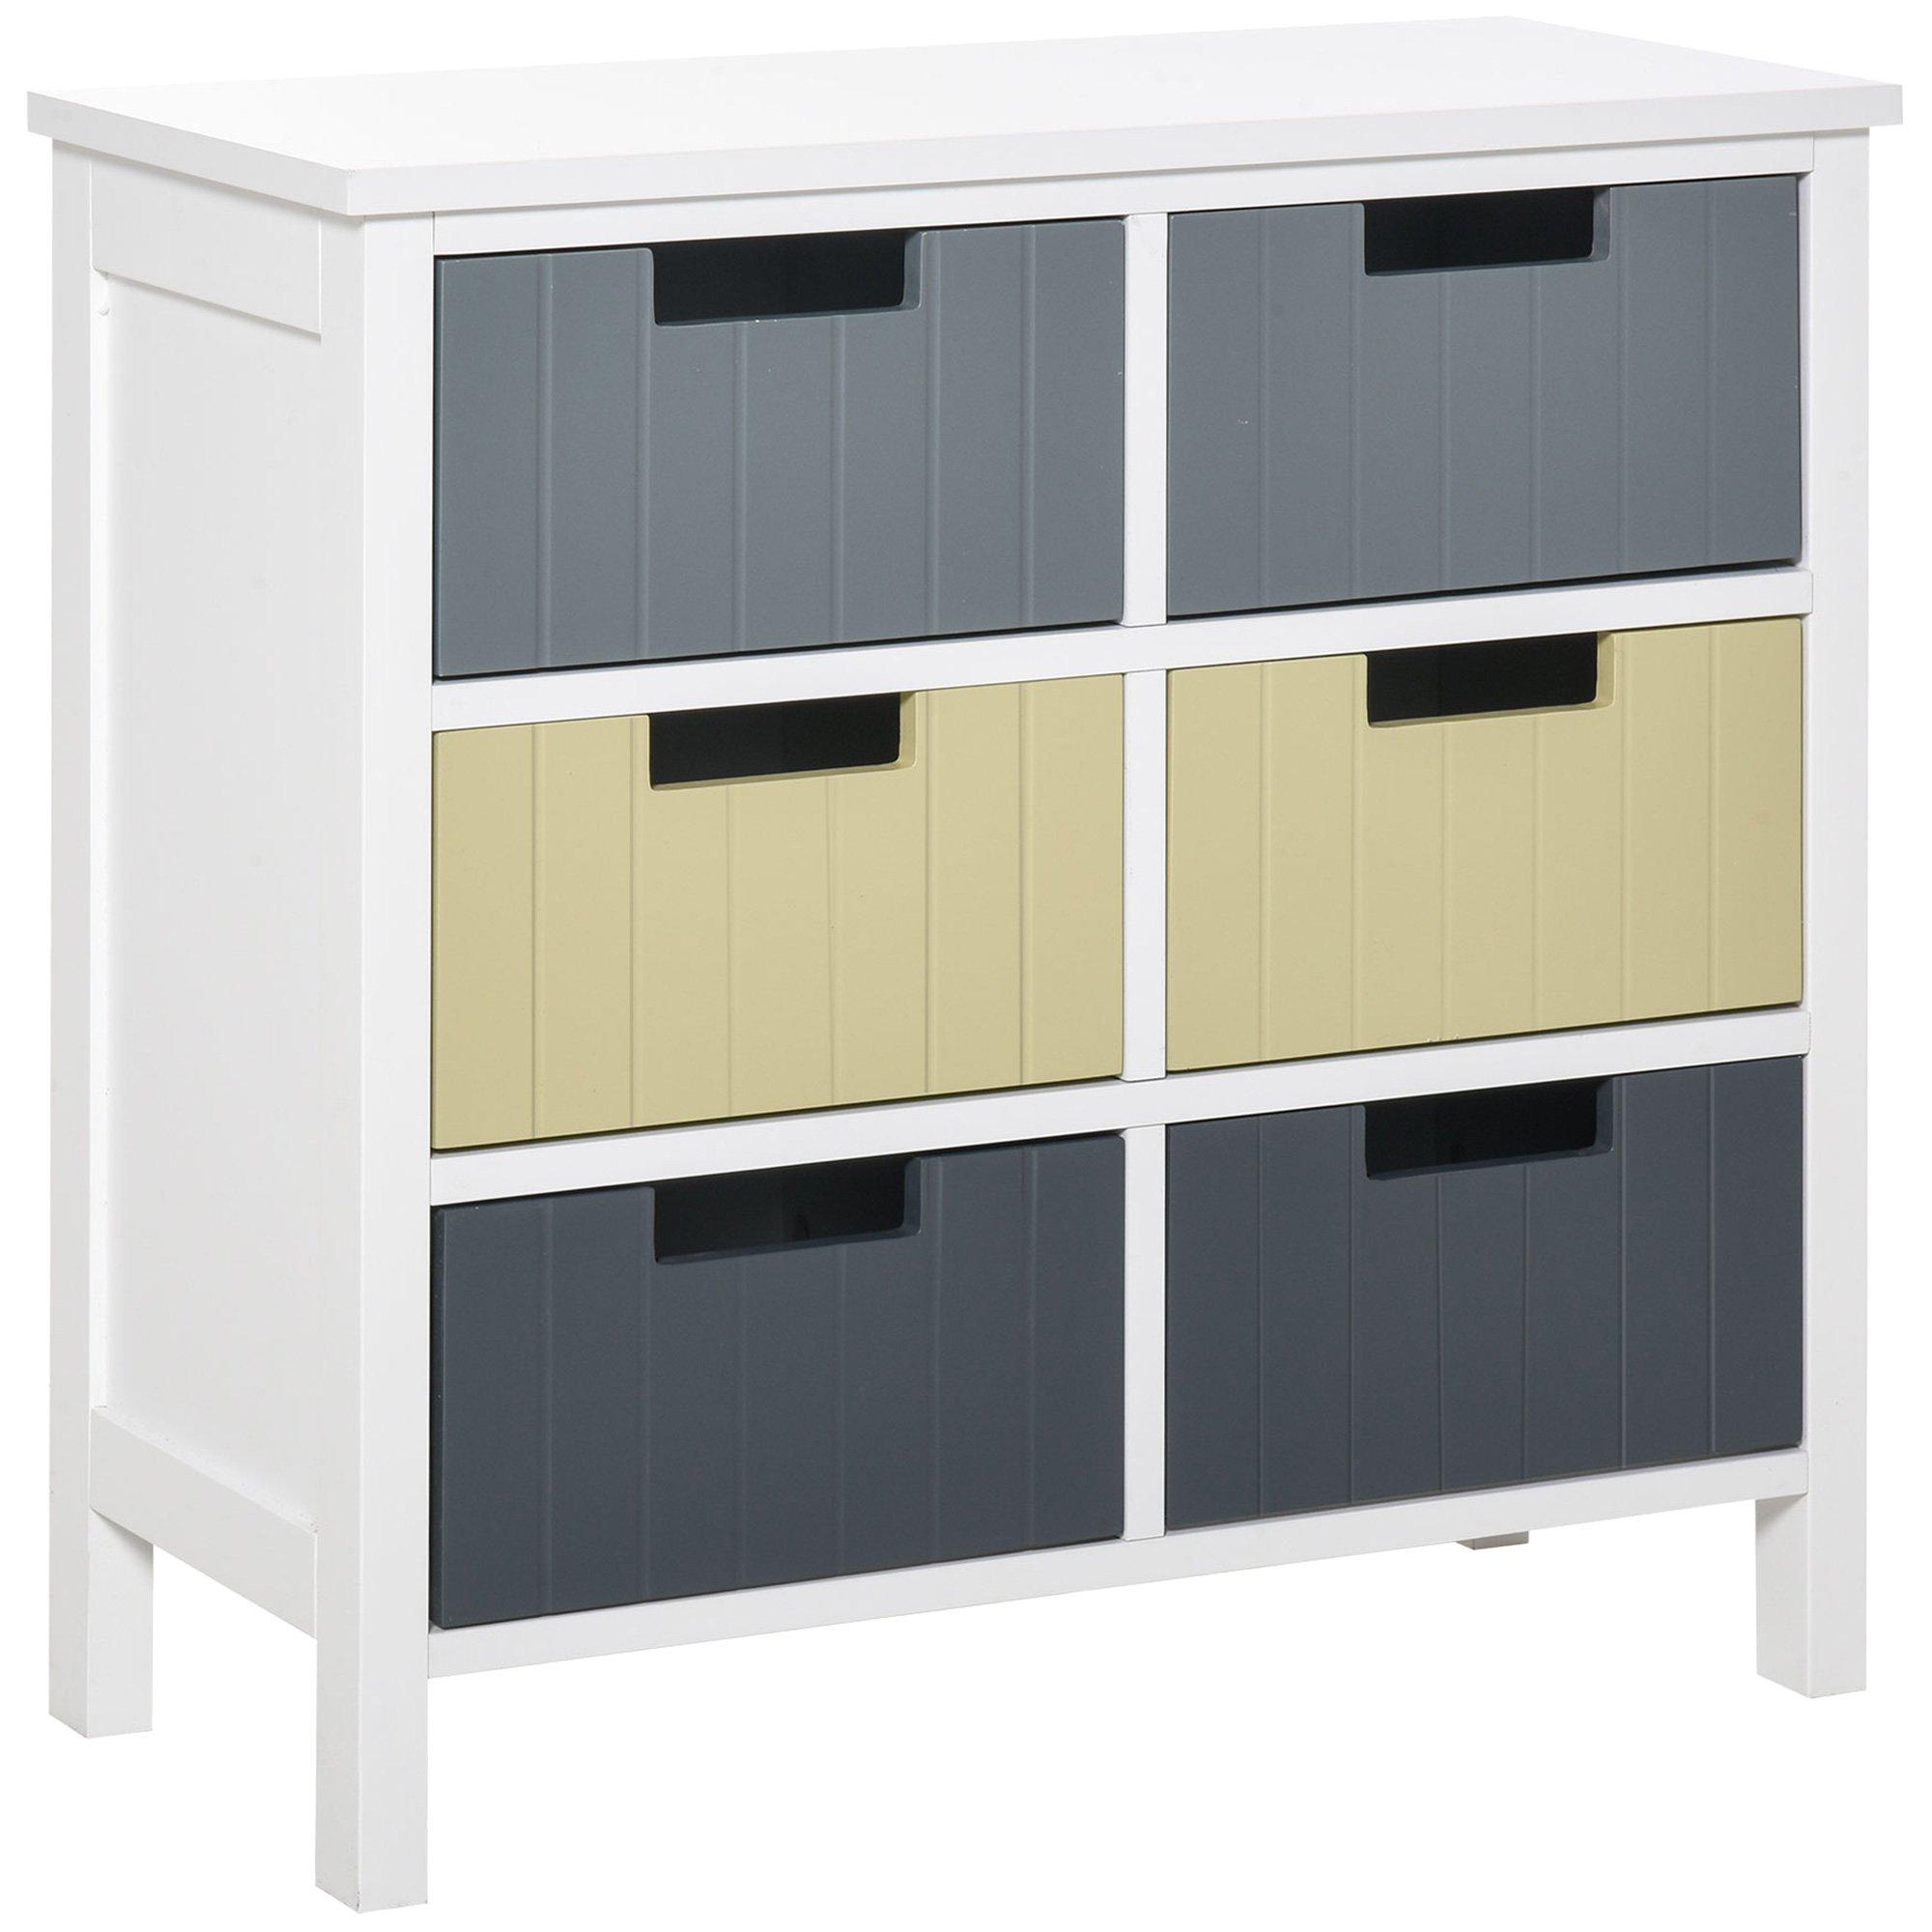 Chest of Drawers Storage Side Cabinet with 6 Detachable Drawers